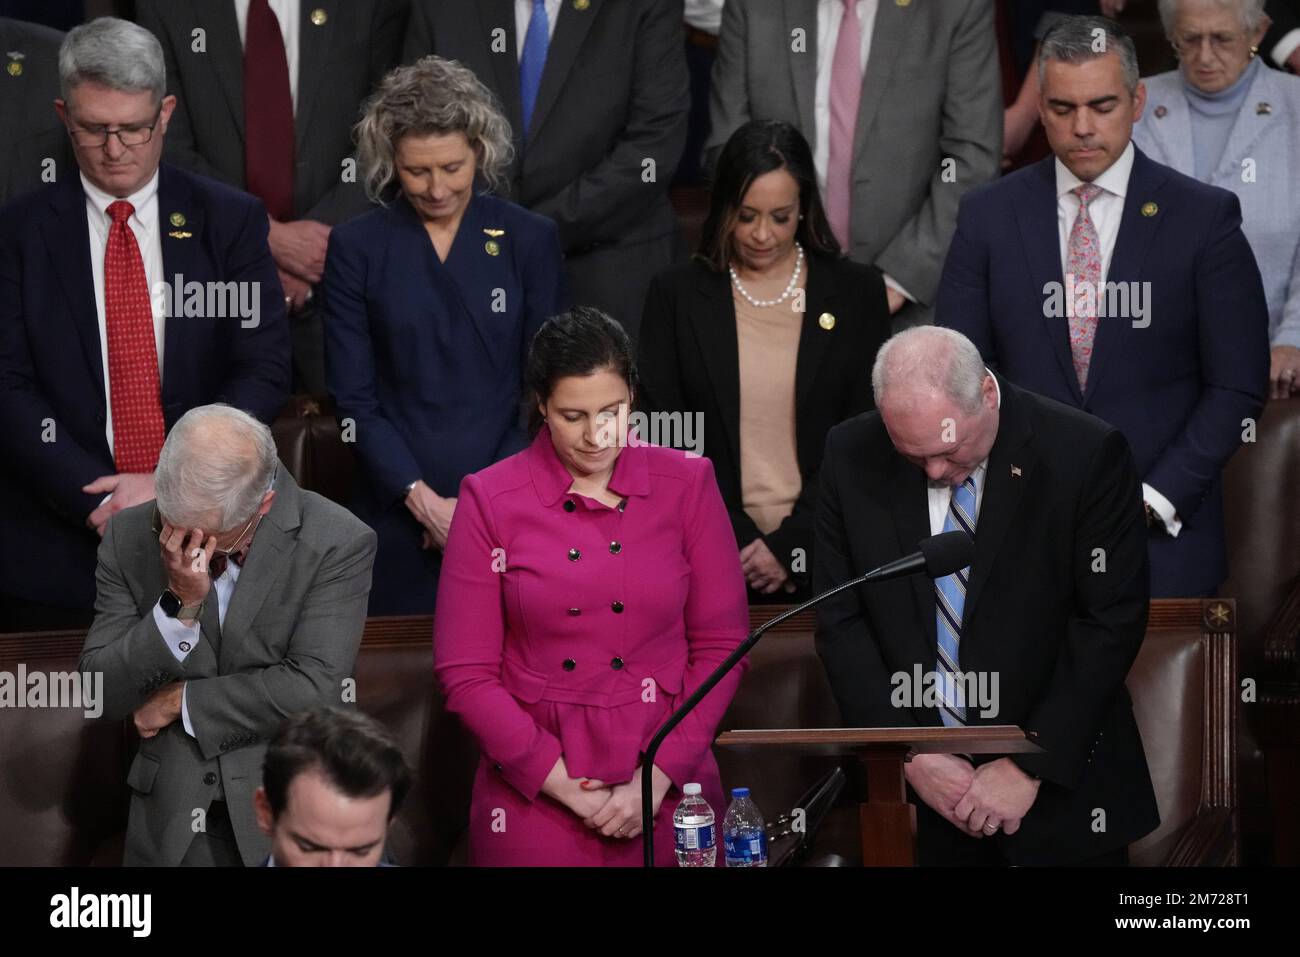 Washington, United States. 06th Jan, 2023. Members of the House of Representatives pray before a late-night session to elect a House Speaker begins at the U.S. Capitol in Washington, DC on Friday, January 6, 2023. Rep. Kevin McCarthy, R-CA, is trying to win over a group of right-wing opponents who have blocked 13 attempts to elect him as Speaker. Photo by Pat Benic/UPI Credit: UPI/Alamy Live News Stock Photo